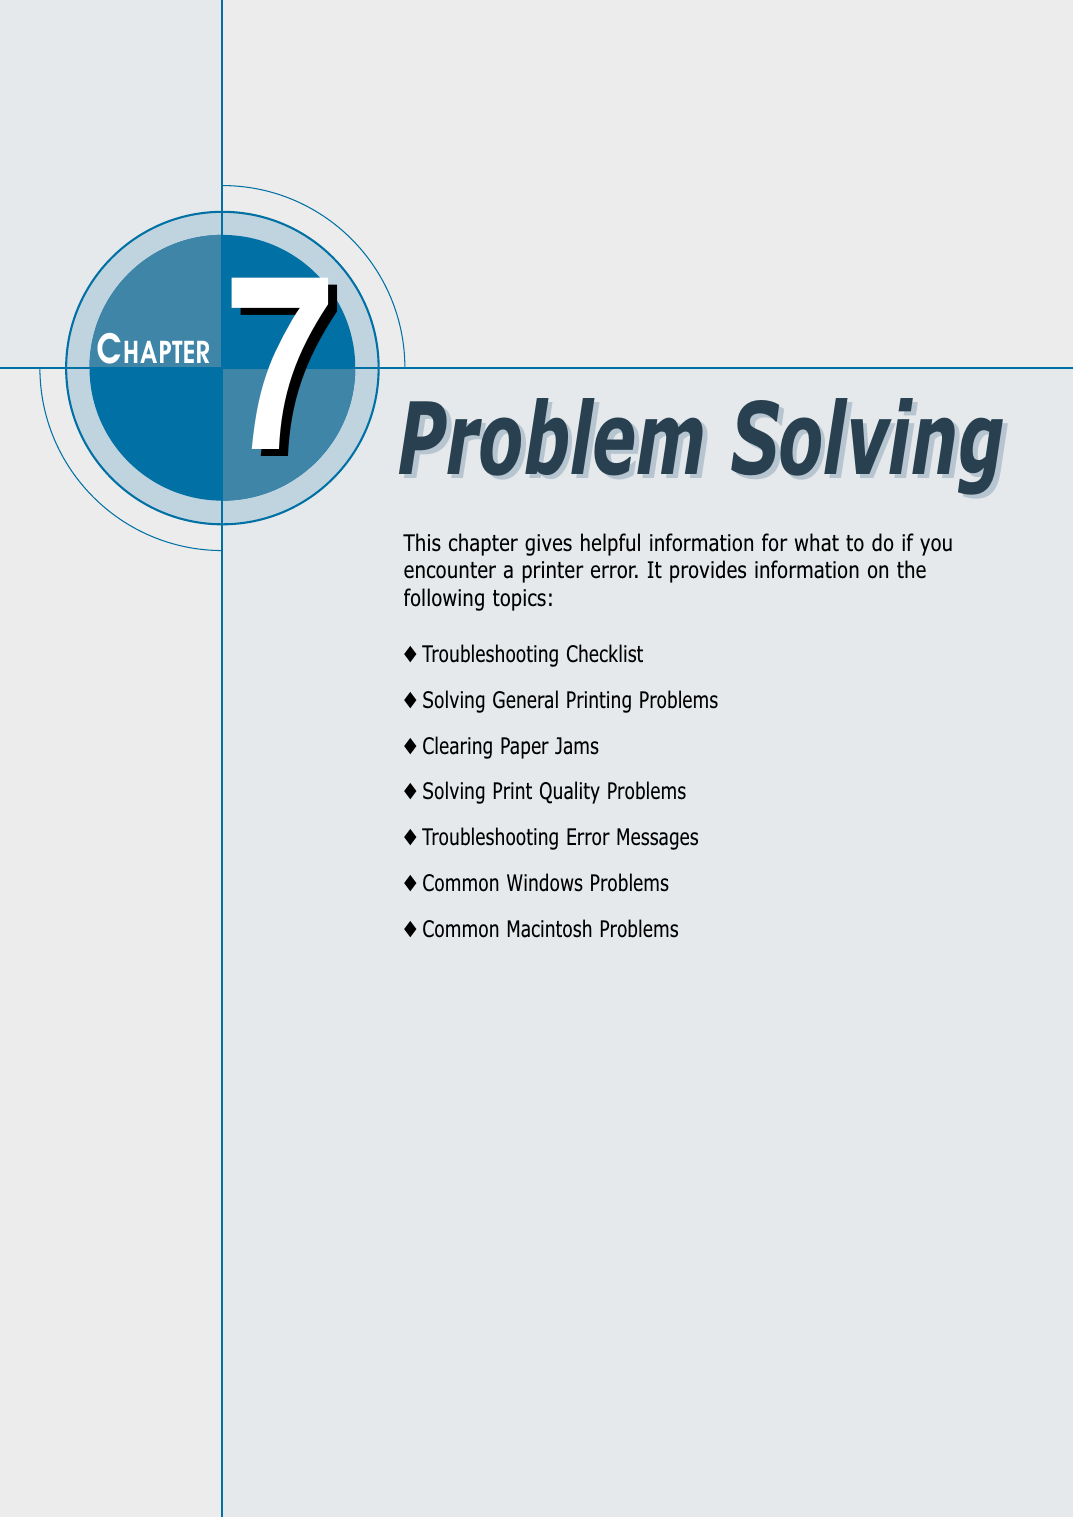 This chapter gives helpful information for what to do if youencounter a printer error. It provides information on thefollowing topics:◆ Troubleshooting Checklist◆ Solving General Printing Problems◆ Clearing Paper Jams◆ Solving Print Quality Problems◆ Troubleshooting Error Messages◆ Common Windows Problems◆ Common Macintosh Problems77CHAPTERProblem SolvingProblem Solving